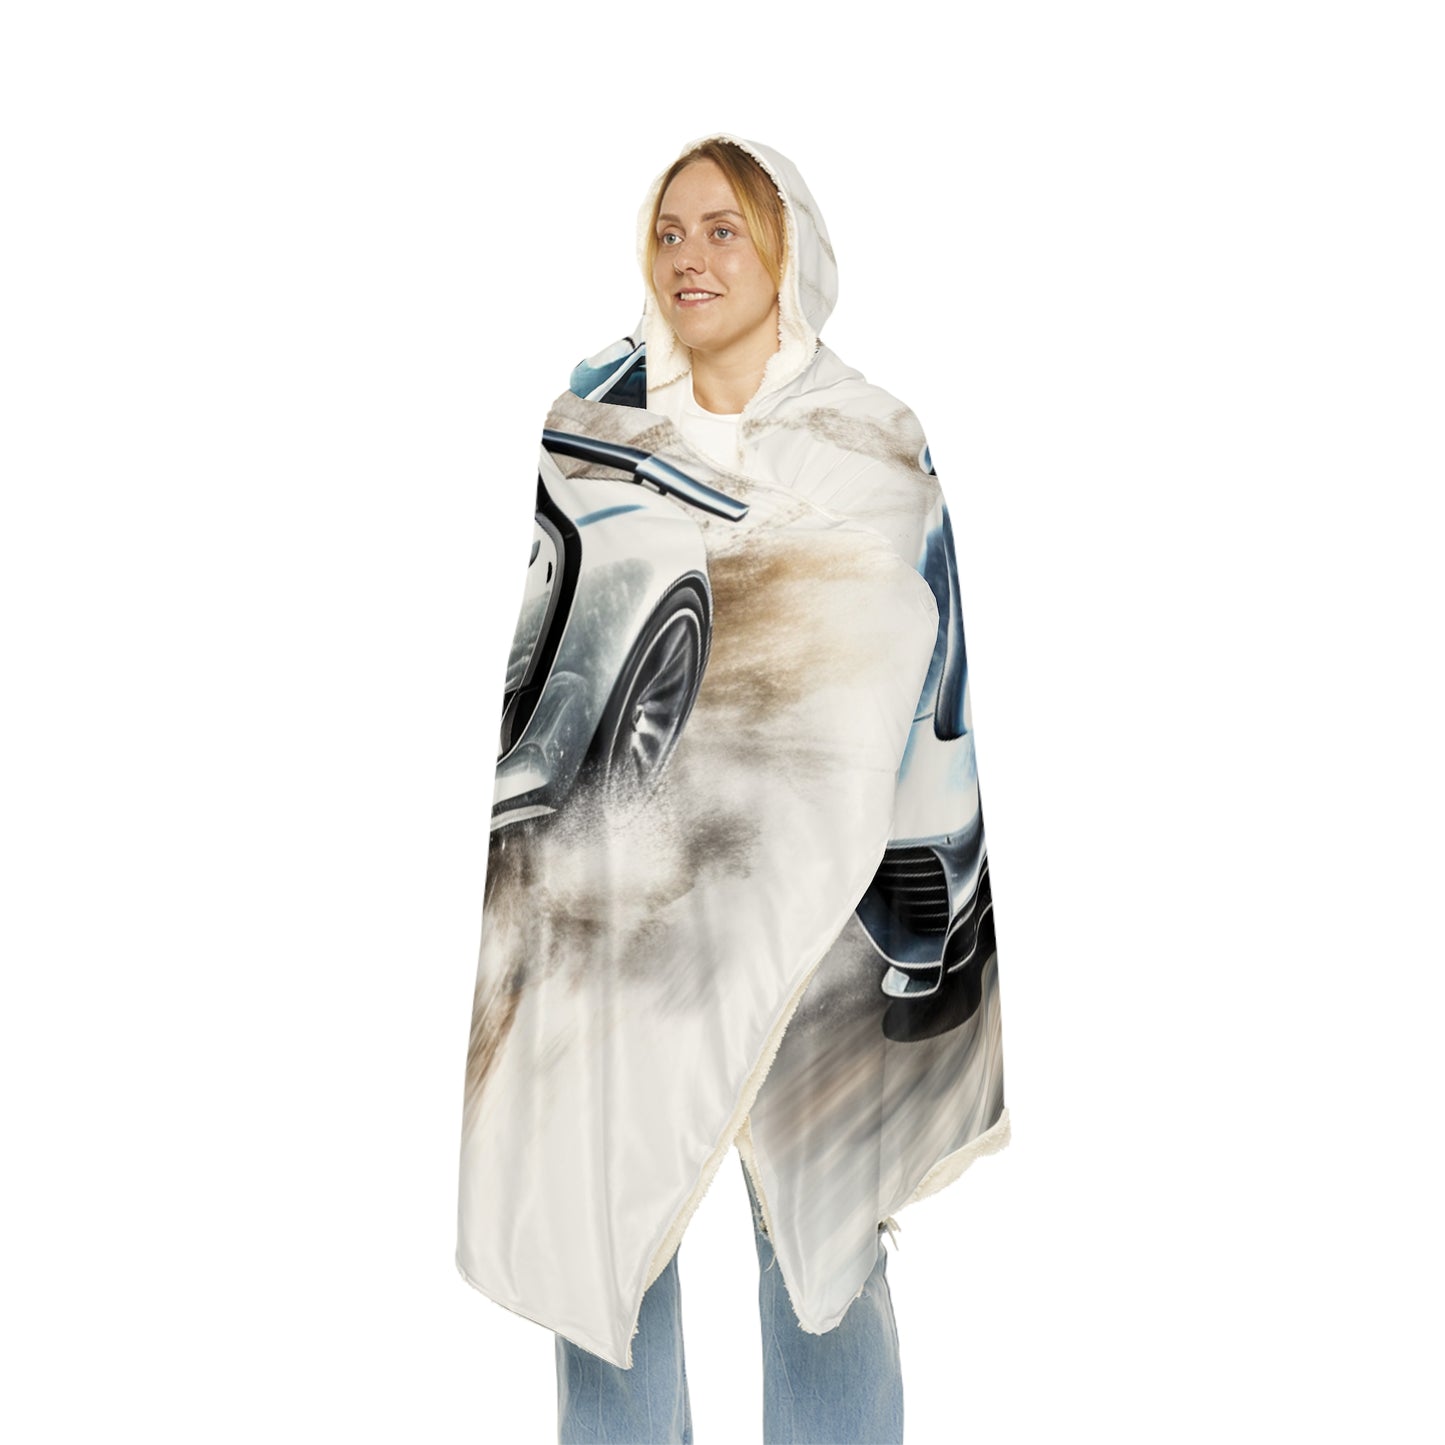 Snuggle Hooded Blanket 918 Spyder white background driving fast with water splashing 2